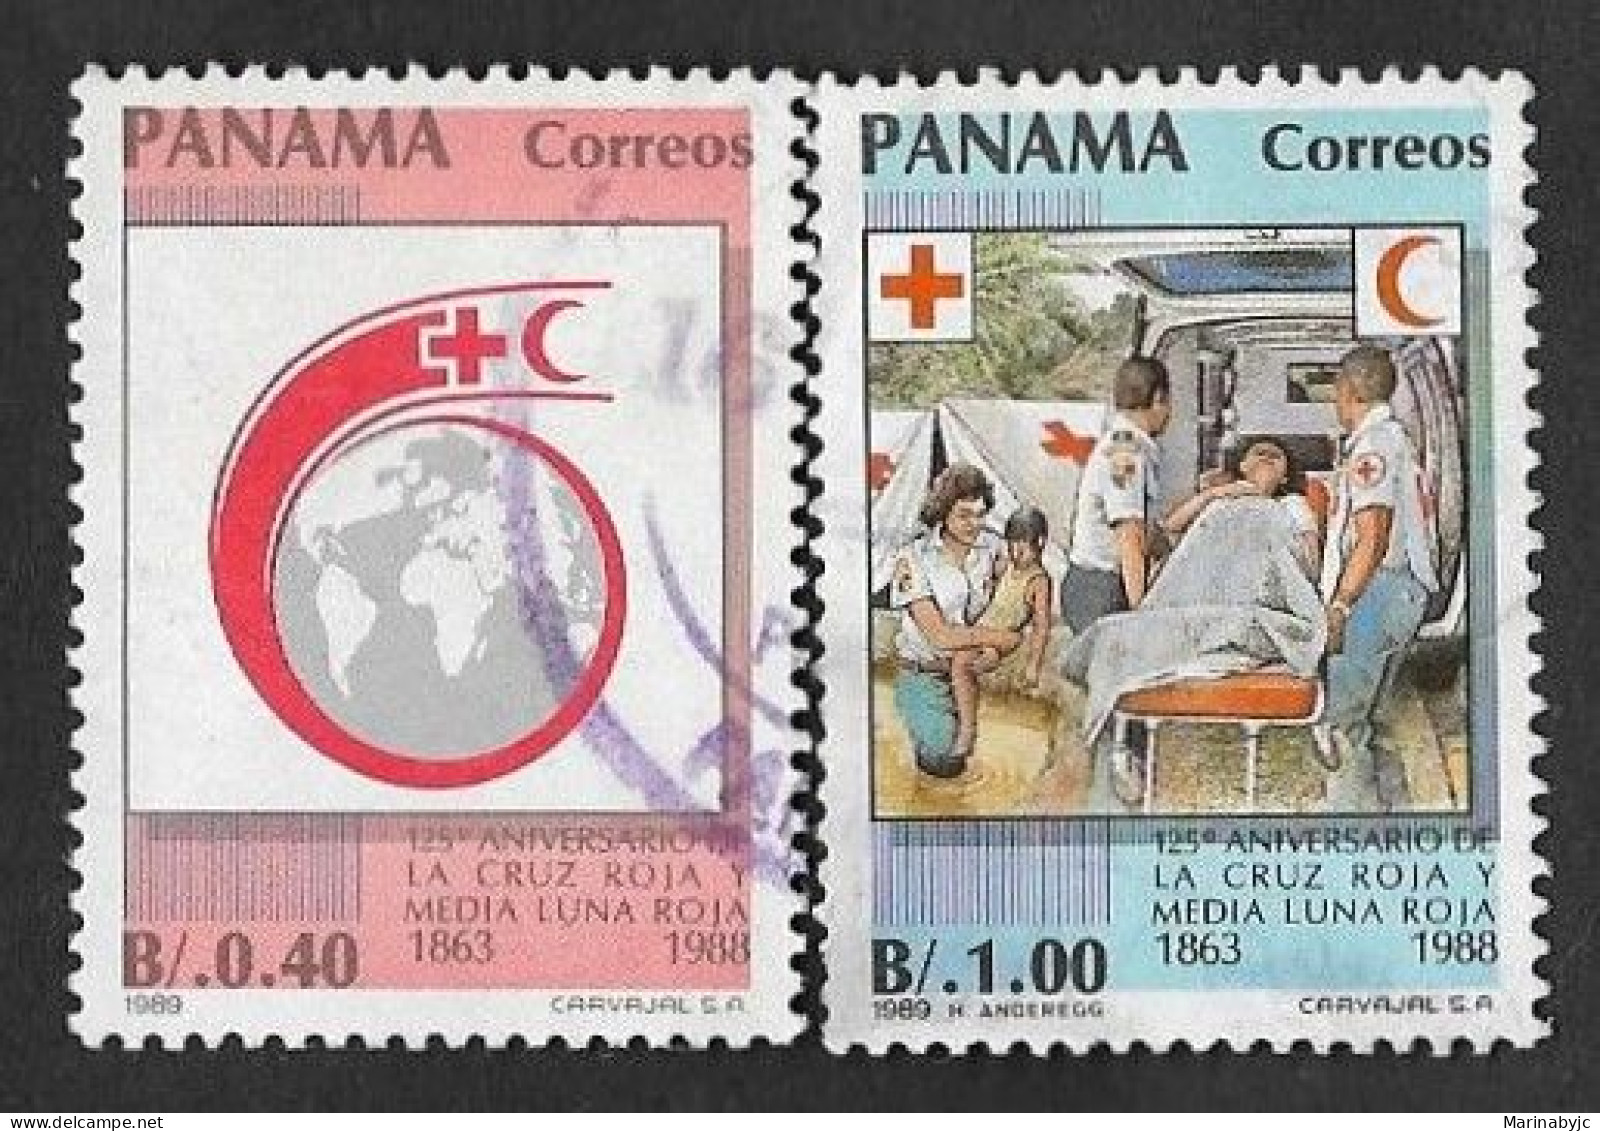 SE)1988 PANAMA 154TH ANNIVERSARY OF THE RED CROSS AND RED CRESCENT, 2 USED STAMPS - Panamá